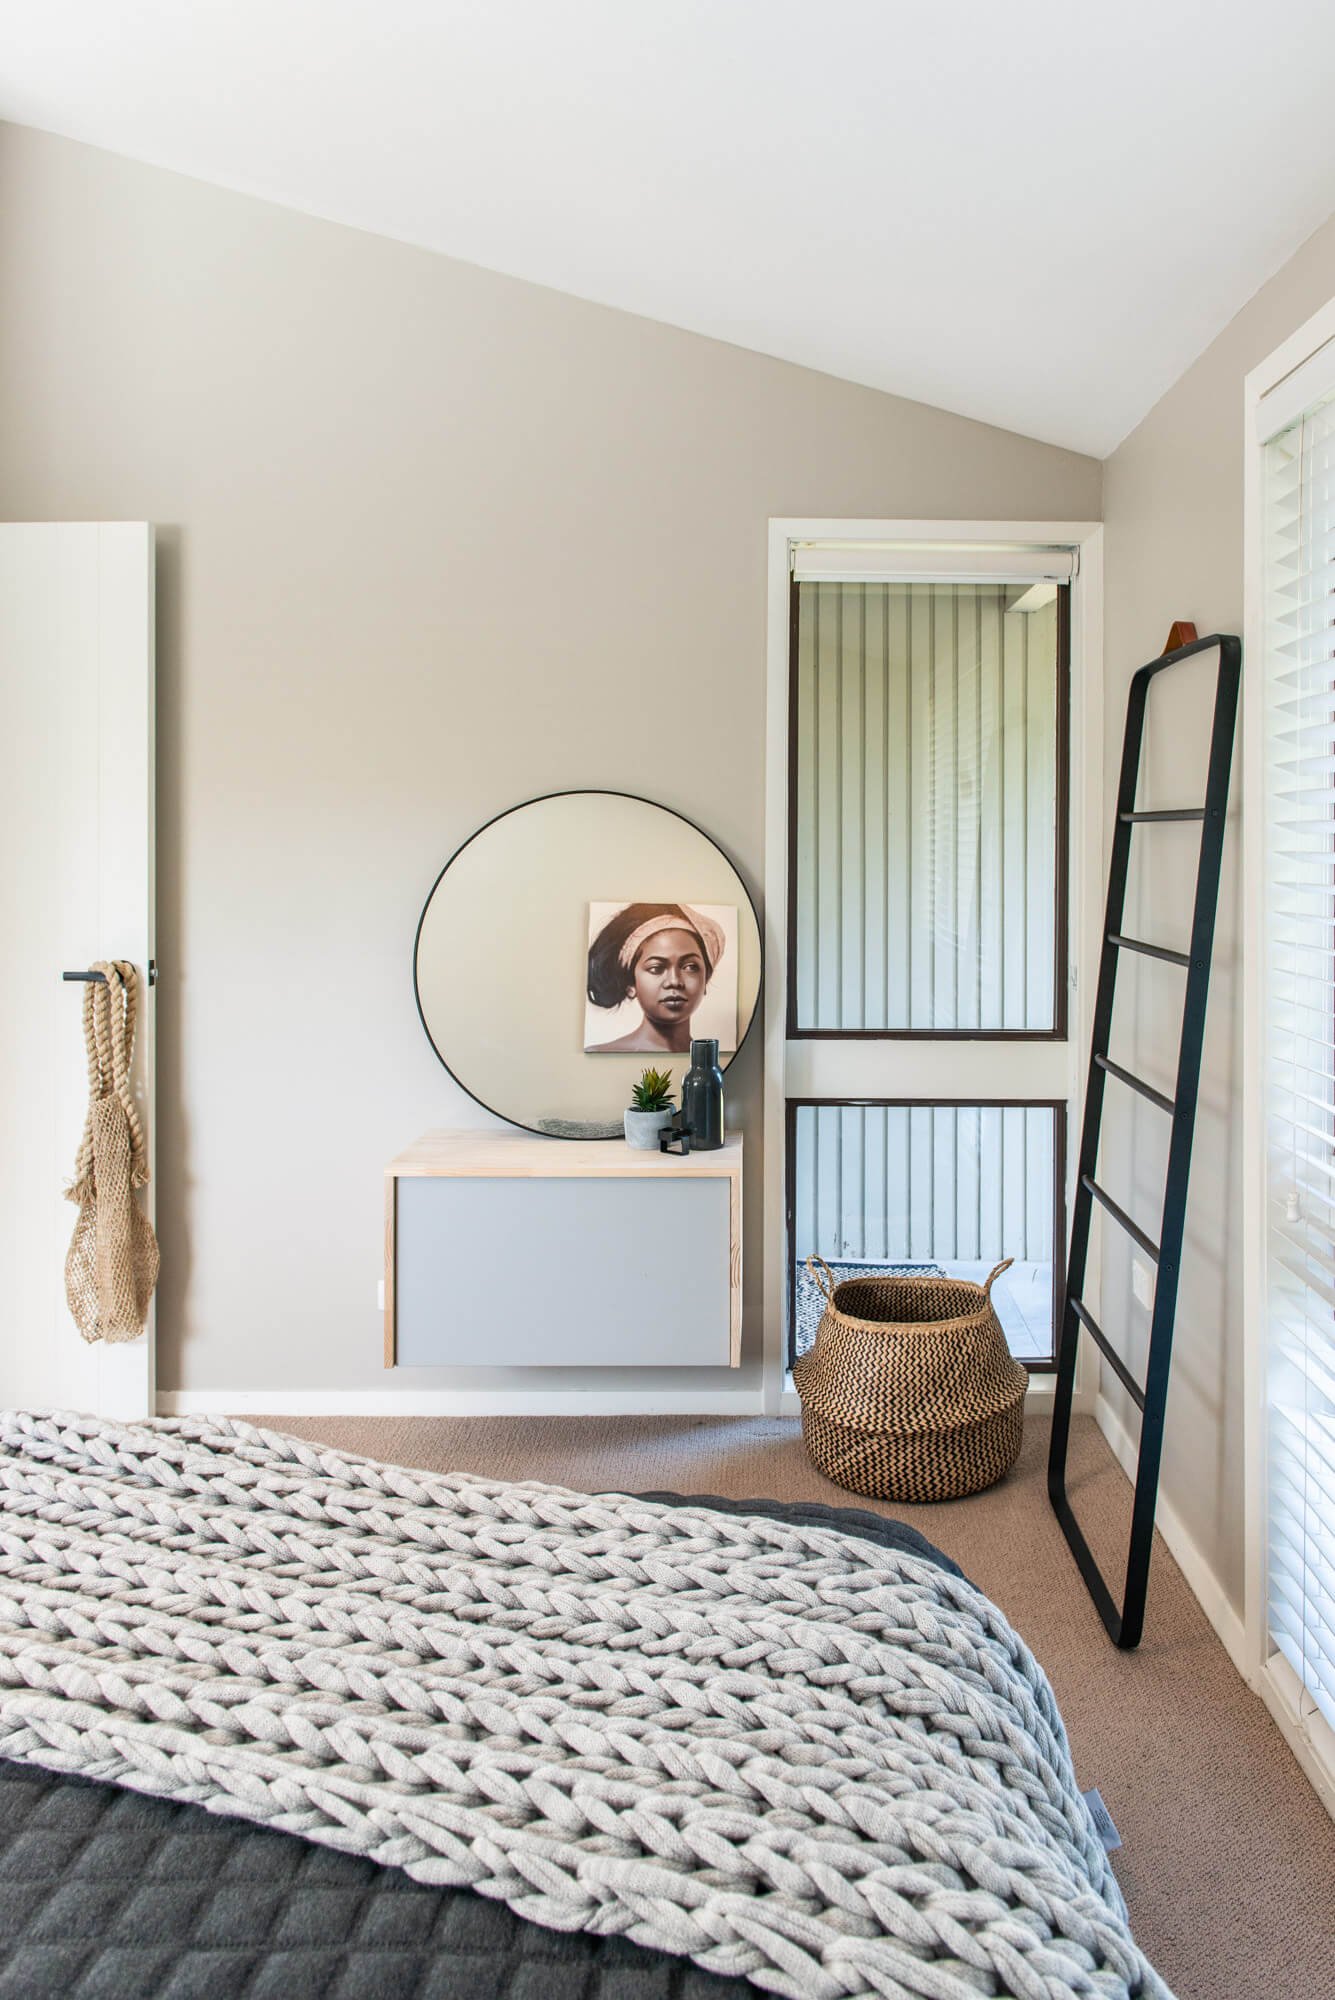 An example of how to place a mirror in an interiors scheme on the central coast nsw.jpg